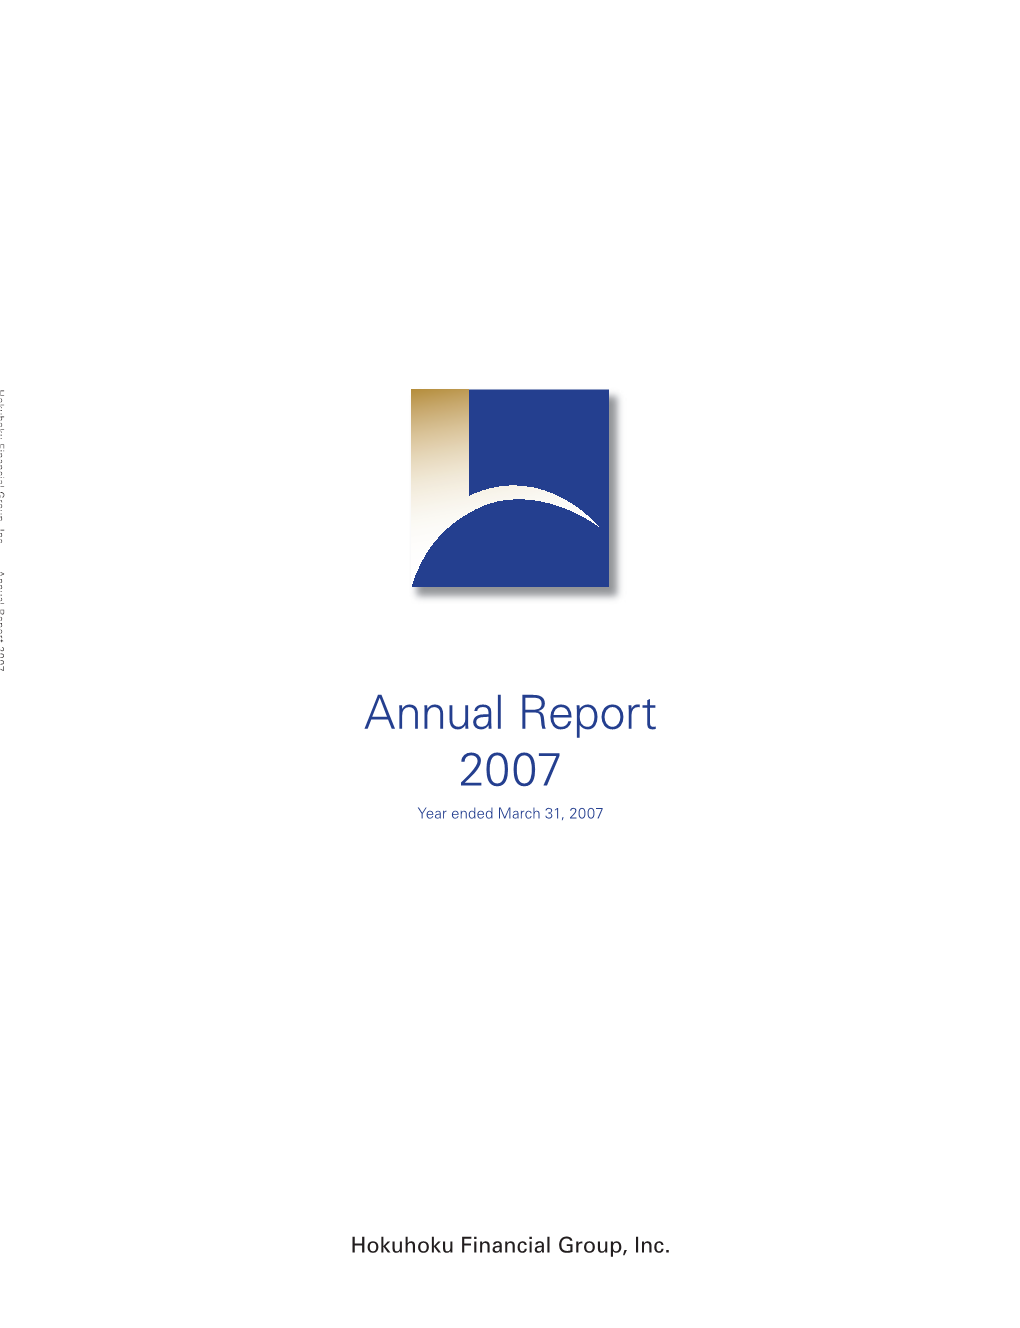 Annual Report 2007 Company Outline (As of March 31, 2007)